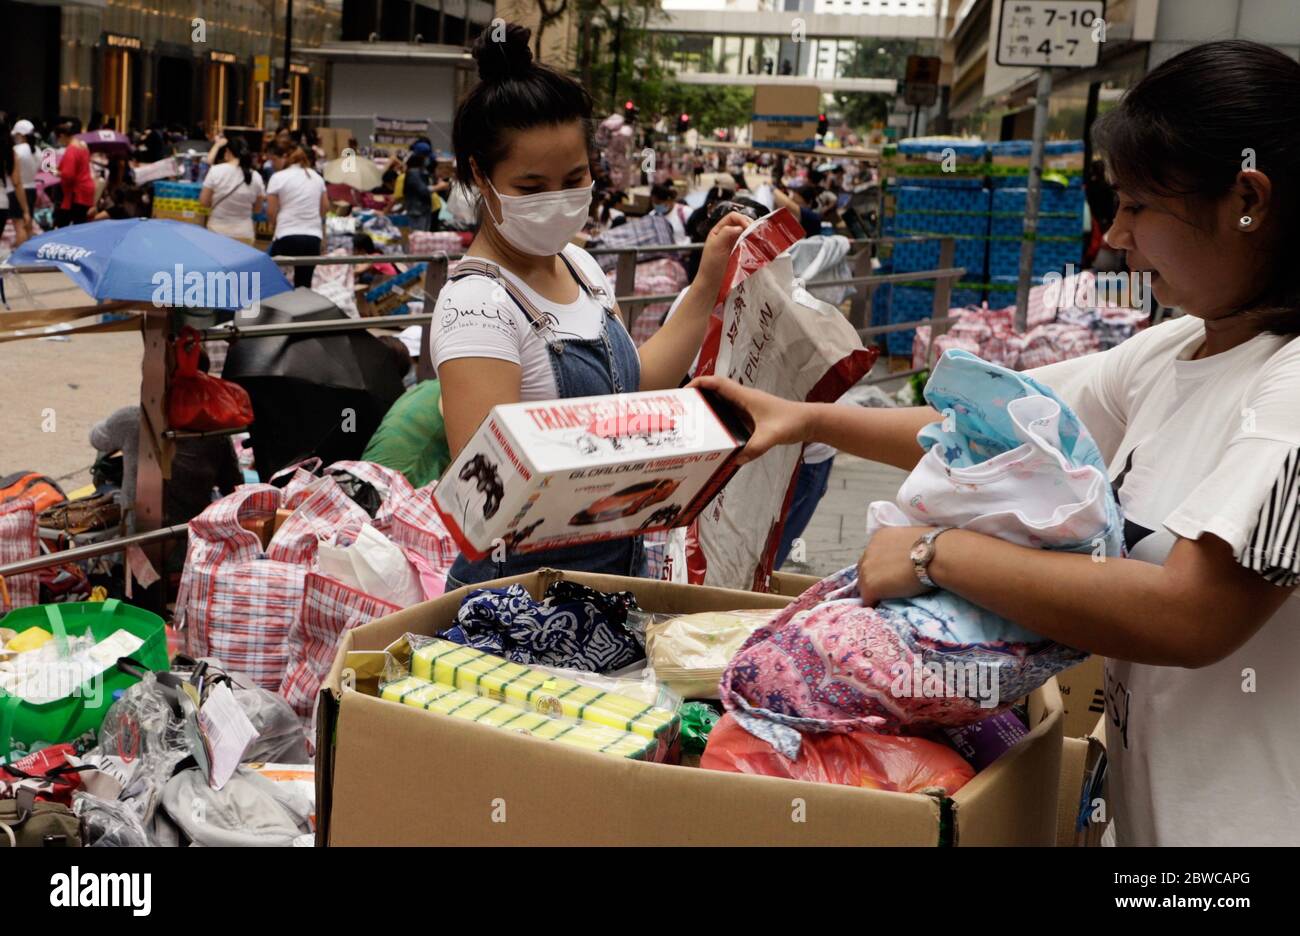 hong-kong-china-31st-may-2020-domestic-helpers-pack-up-daily-necessities-ready-to-deliver-parcels-to-the-families-in-the-philippines-on-sunday-oversea-workers-in-hong-kong-particularly-filipinos-are-frequently-sending-daily-necessities-to-their-homelands-to-support-their-families-who-comes-from-lower-stratum-of-societymay-31-2020-hong-kongzumaliau-chung-ren-credit-liau-chung-renzuma-wirealamy-live-news-2BWCAPG.jpg